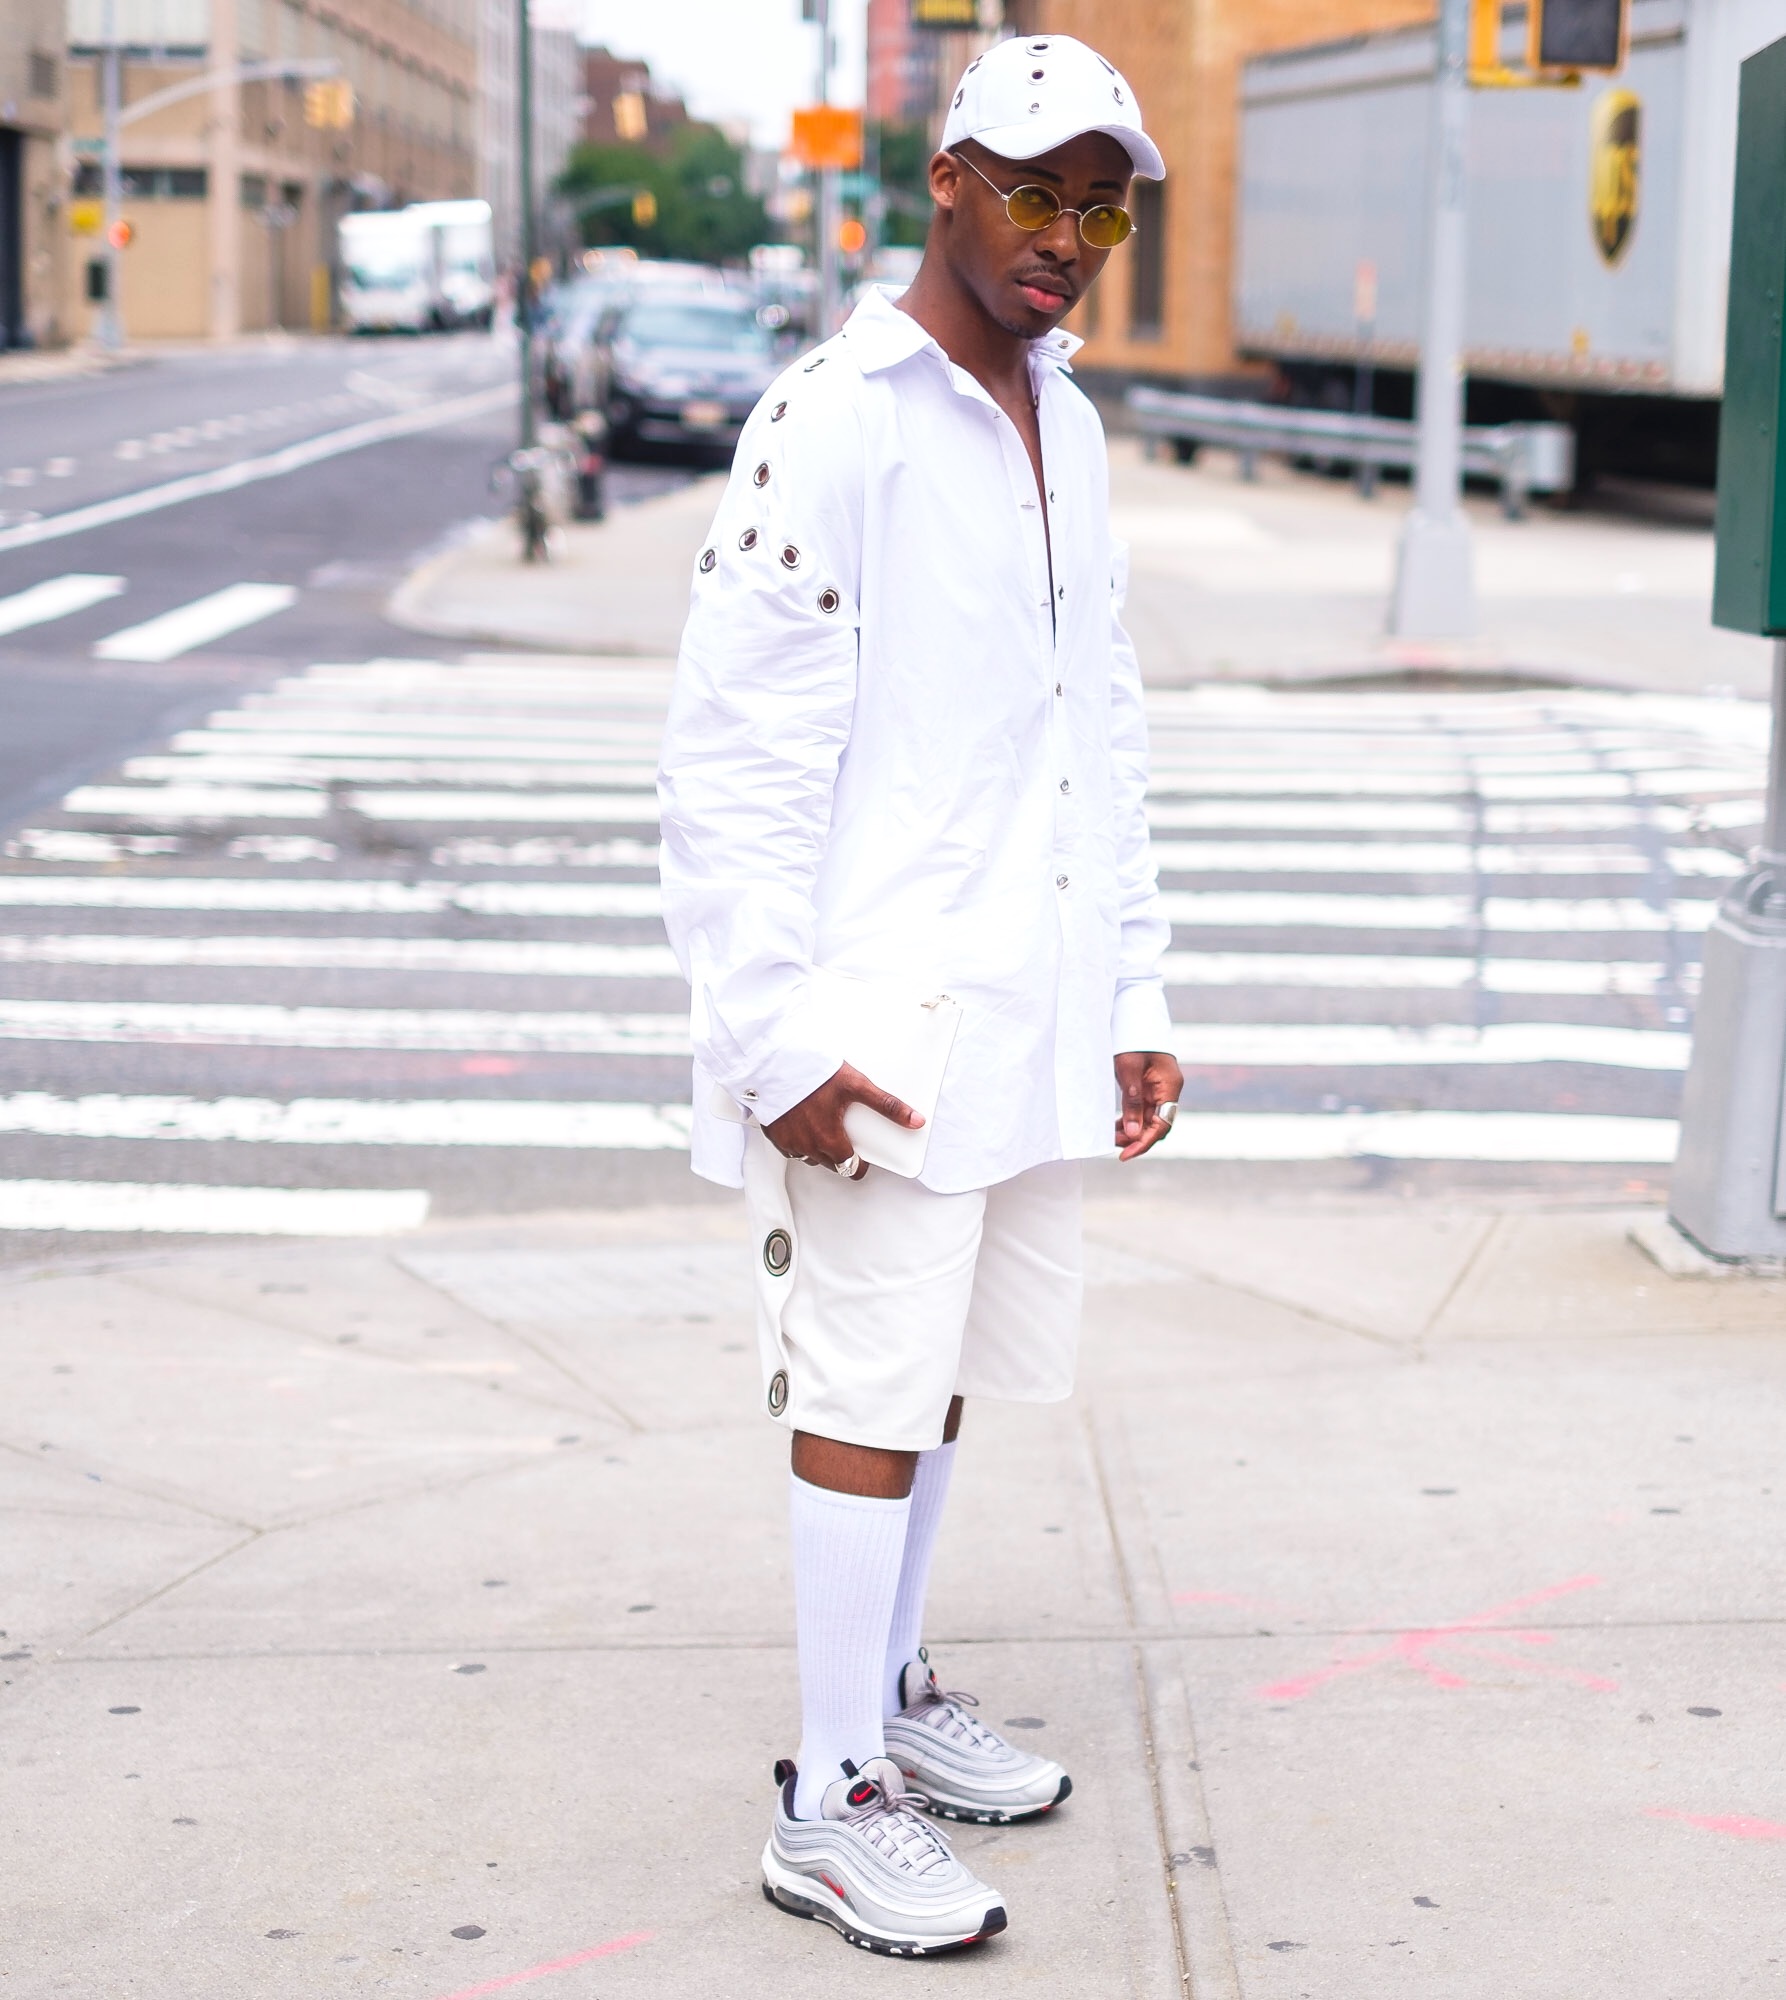 Fashion Bomber of the Day: Elijah from New Jersey